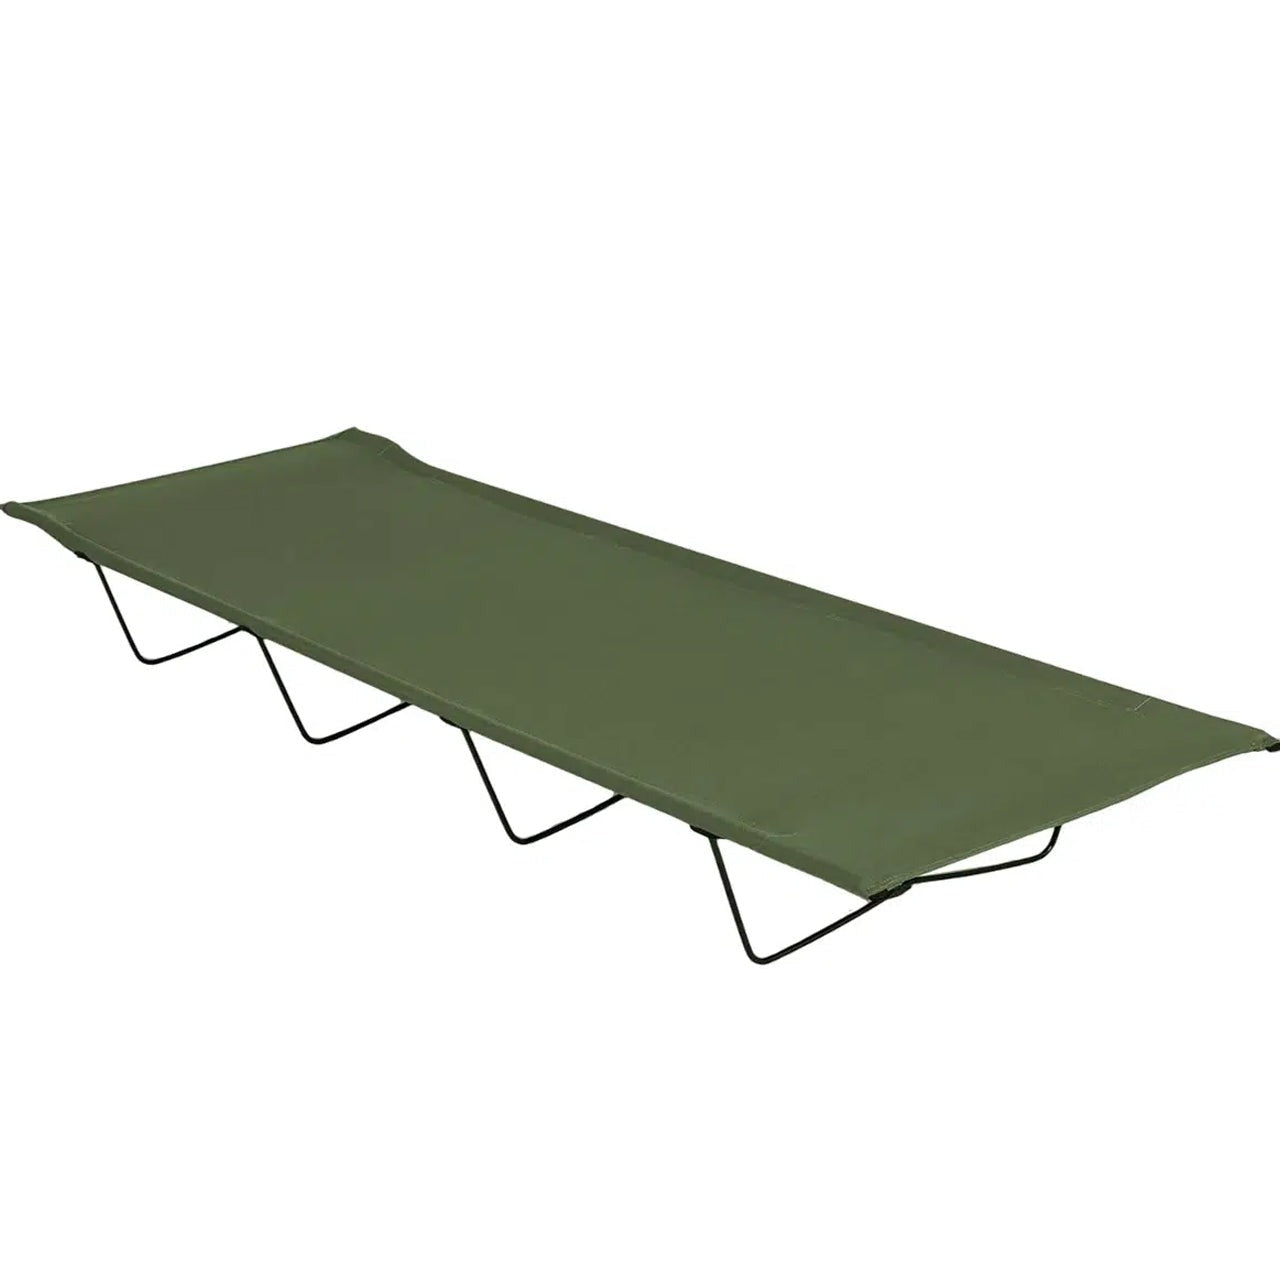 Enjoy peaceful nights on your outdoor adventures with this lightweight and ultra-portable folding camp stretcher! This simple-to-use sleeping solution is perfect for when you need a comfy night's rest away from home. It's the perfect way to cushion yourself from the hard ground, lumps, rocks and roots. www.moralepatches.com.au